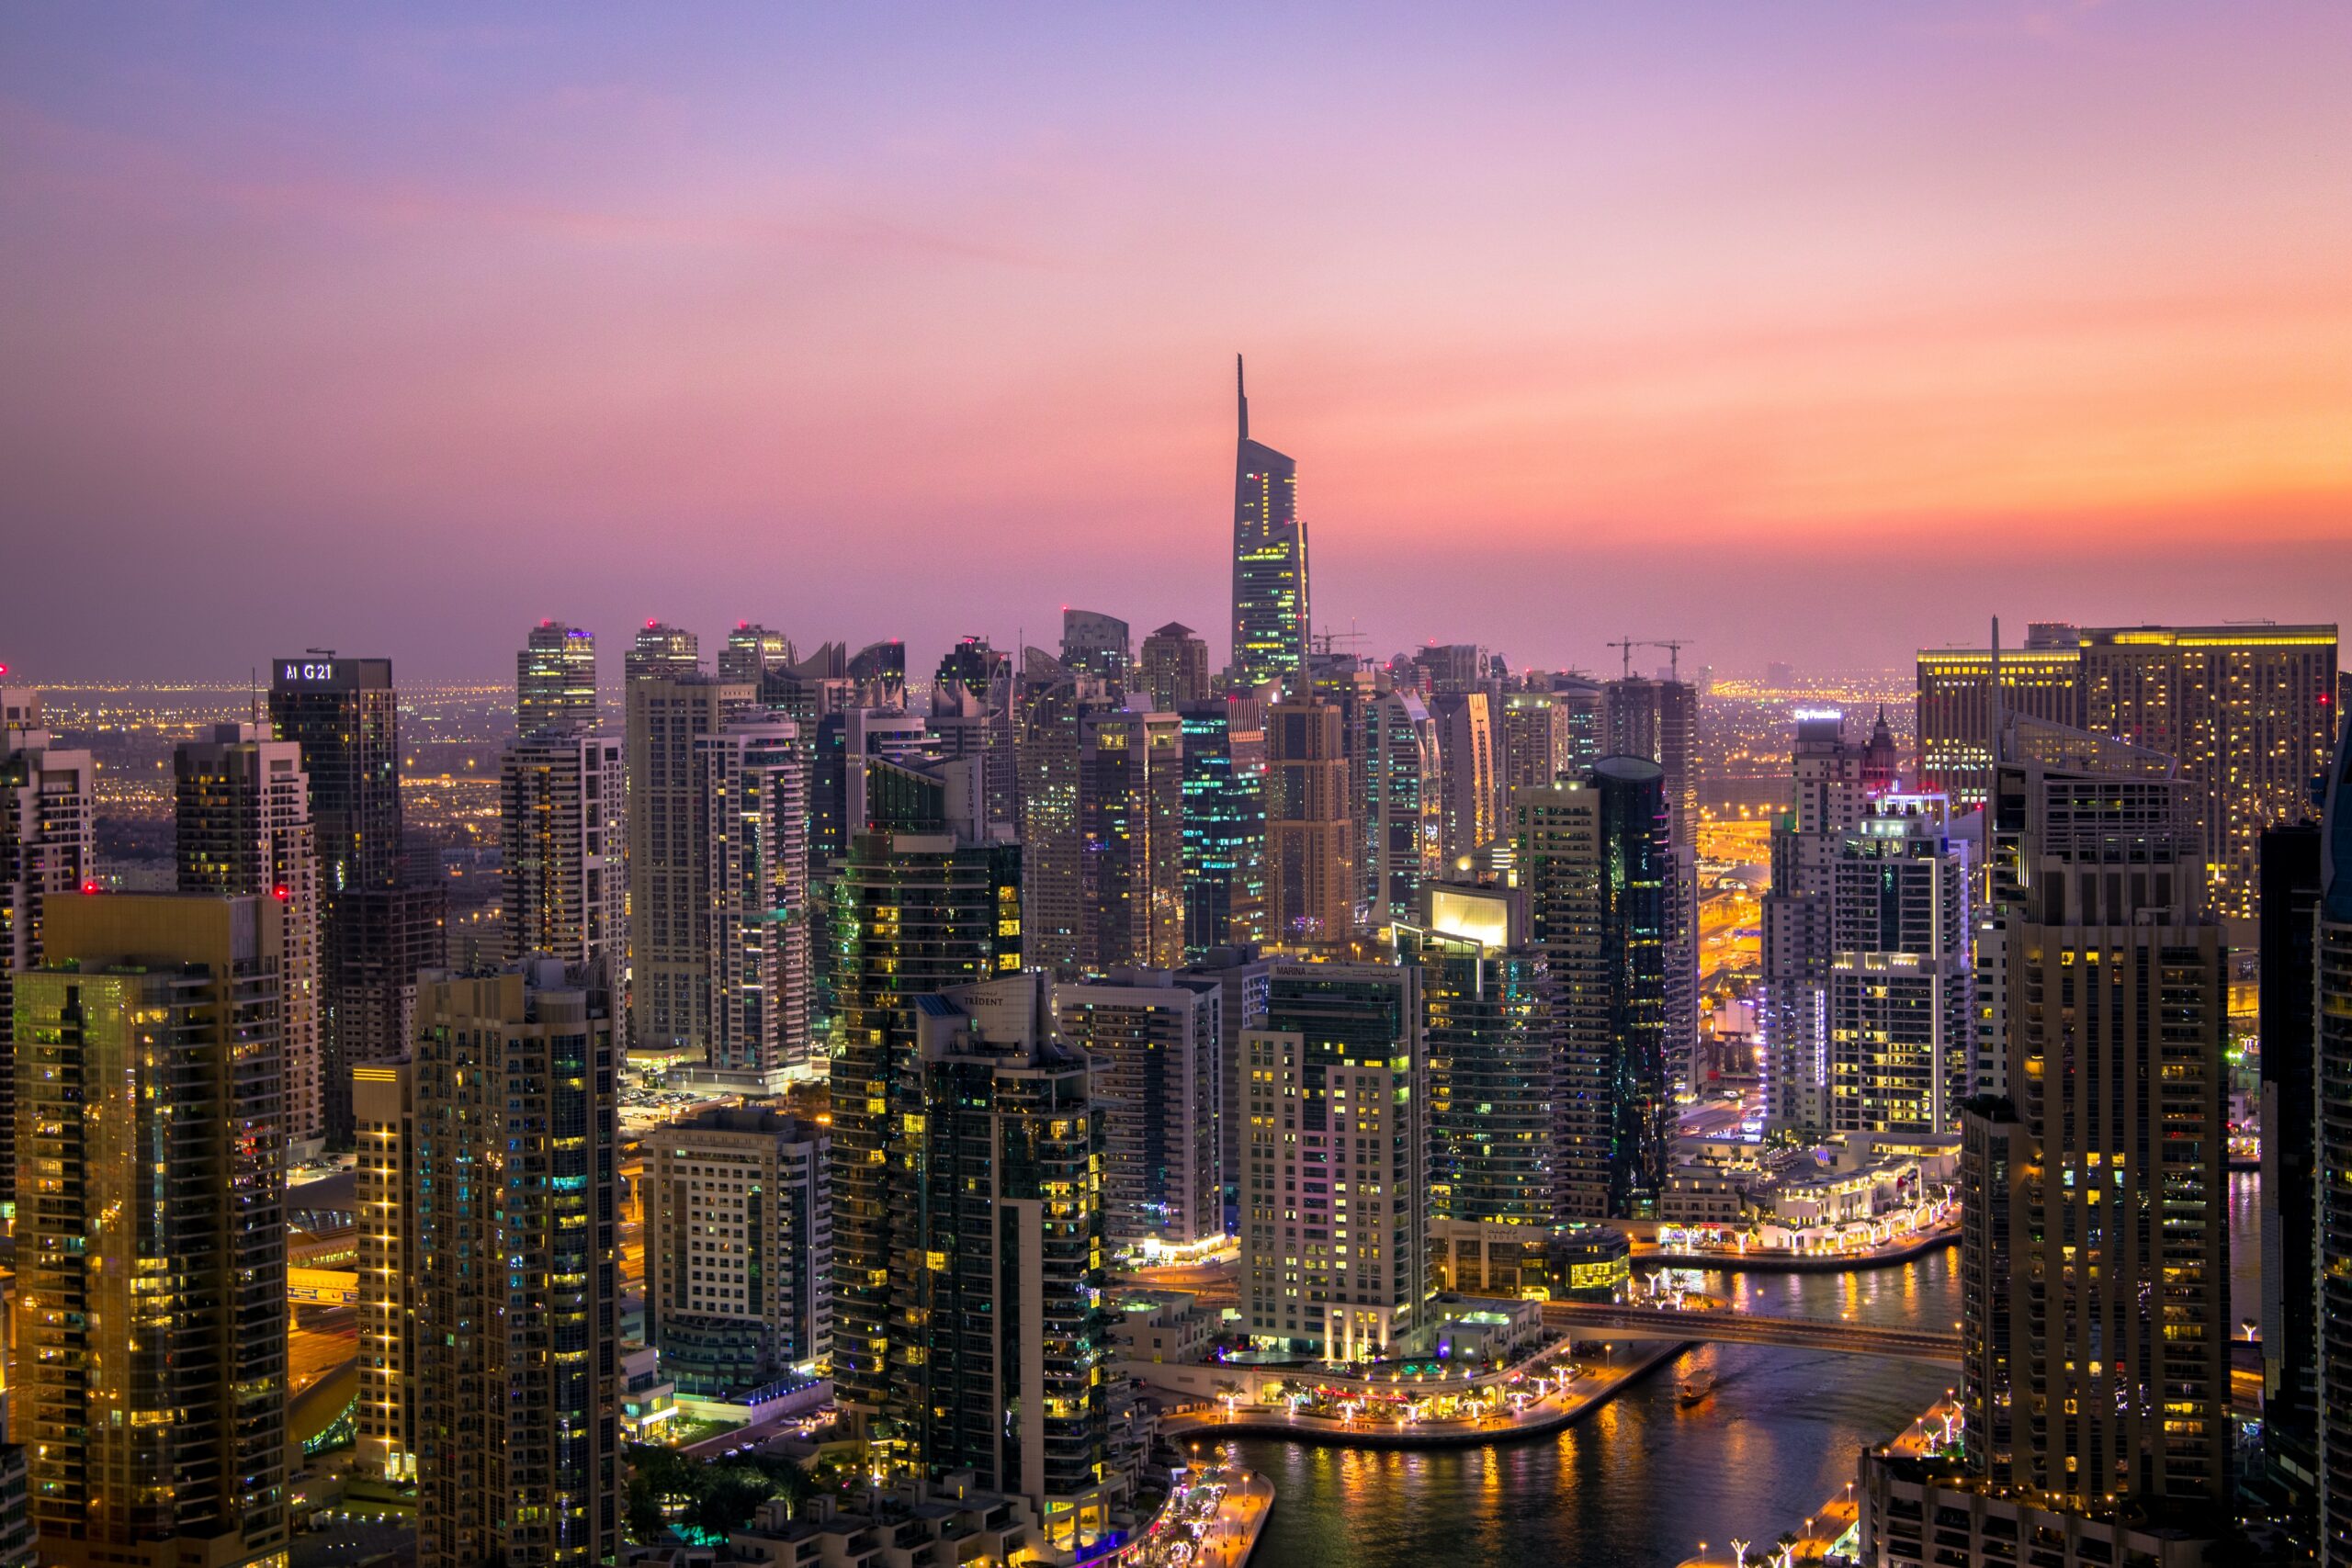 Analyst at Barclays Says the Middle East Is Expected to Be the Fastest Growing Luxury Market in 2023